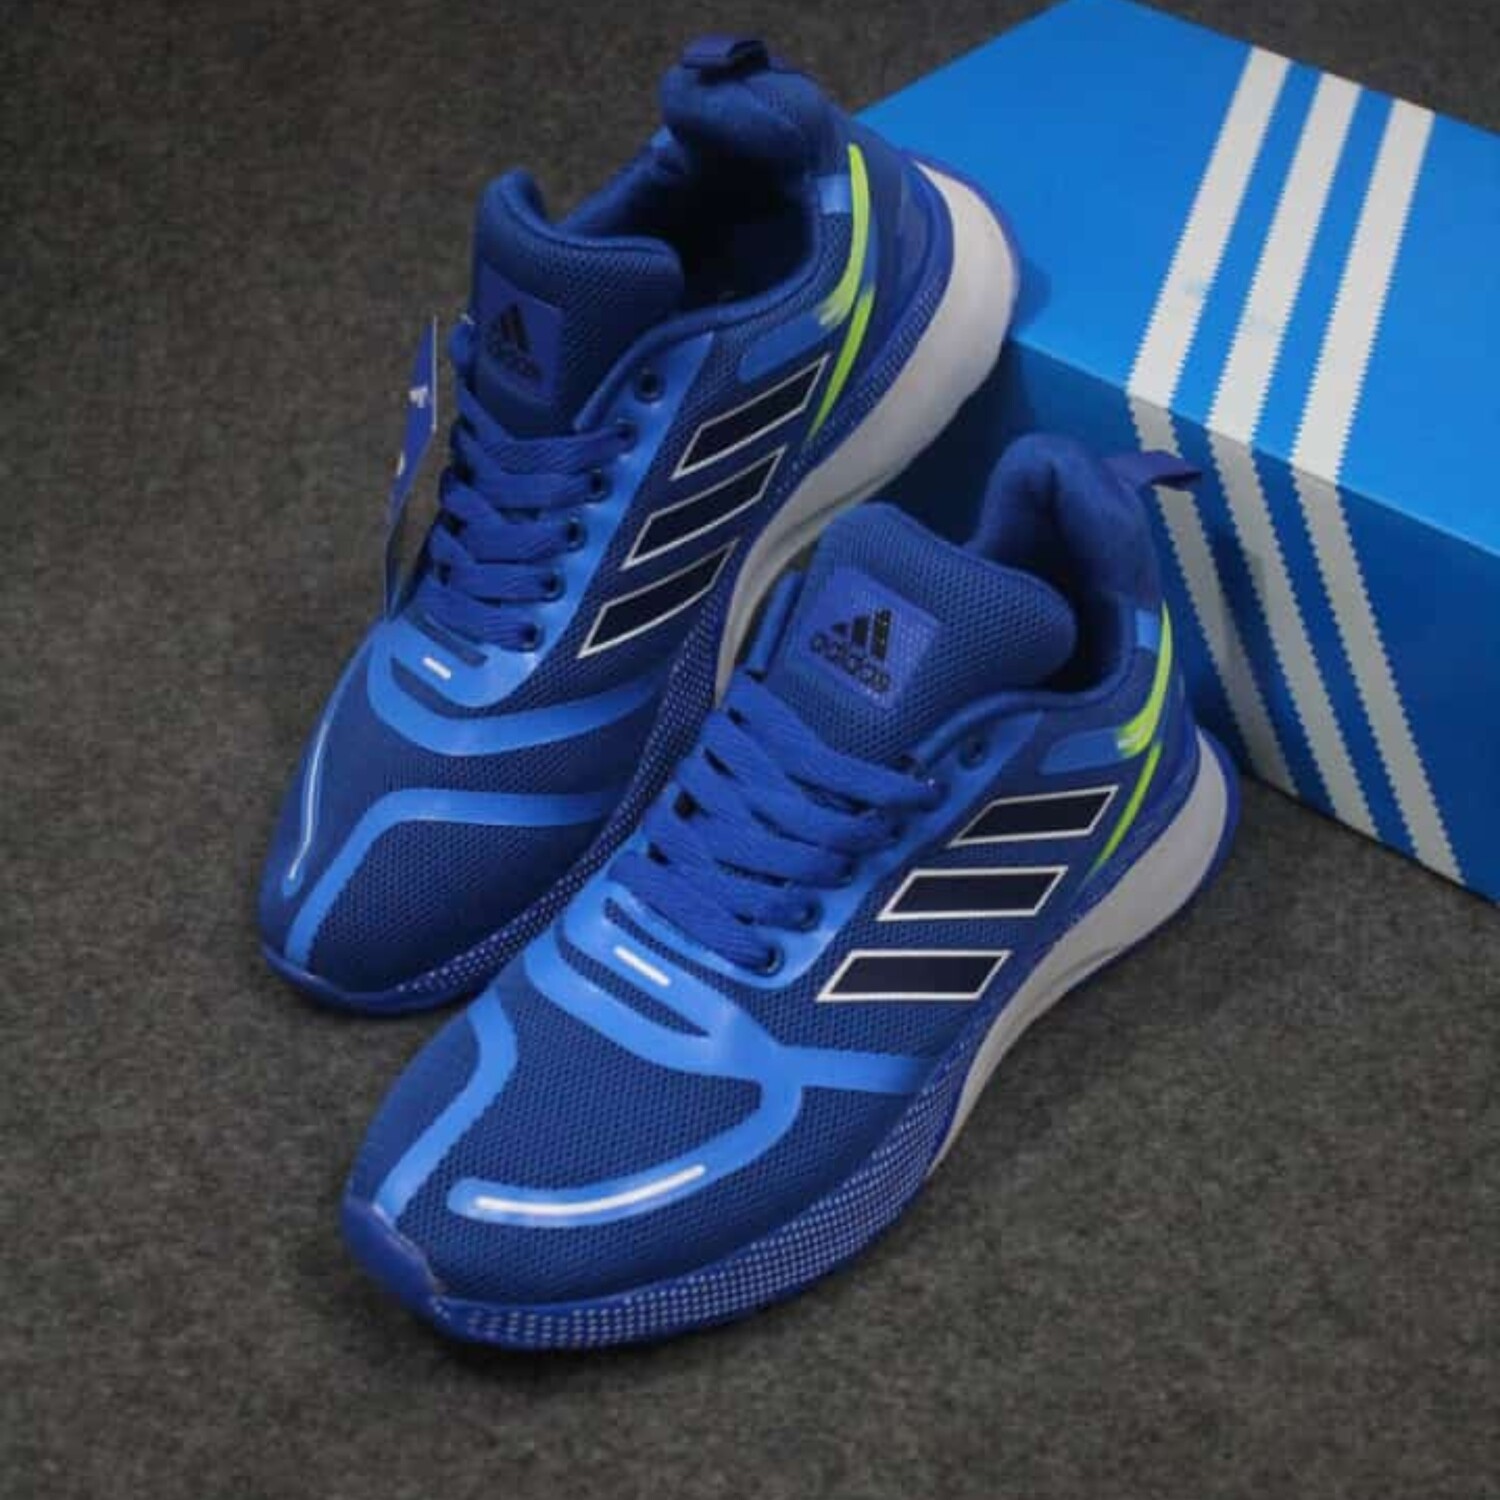 Adidas DNS Sneakers